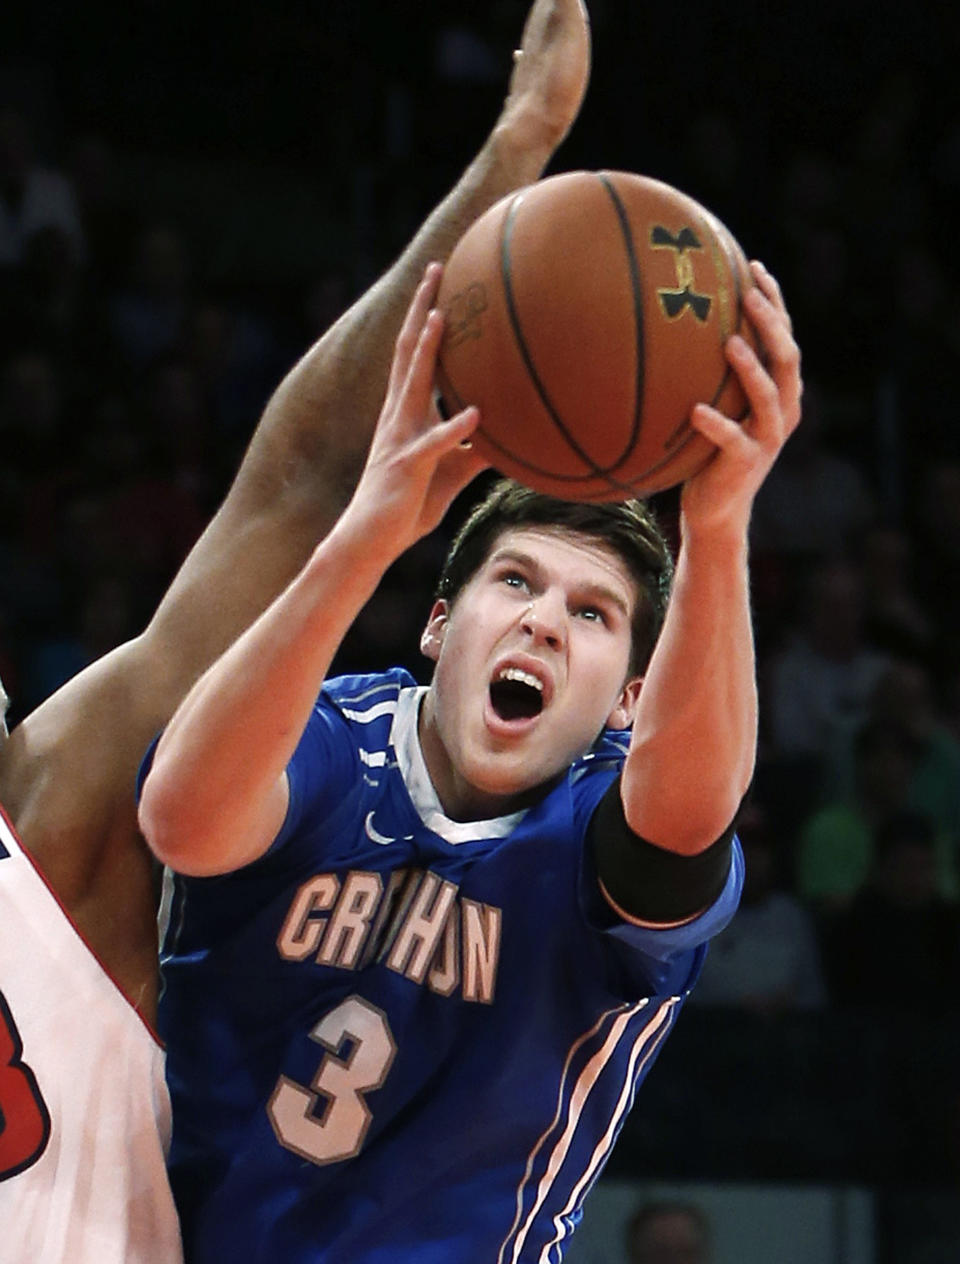 FILe - In this Feb. 9, 2014 file photo, Creighton's Doug McDermott (3) shoots against St. John's Orlando Sanchez, during the first half of an NCAA college basketball game in New York. McDermott was selected to The Associated Press All-America team, released Monday, March 31, 2014. (AP Photo/Jason DeCrow, File)